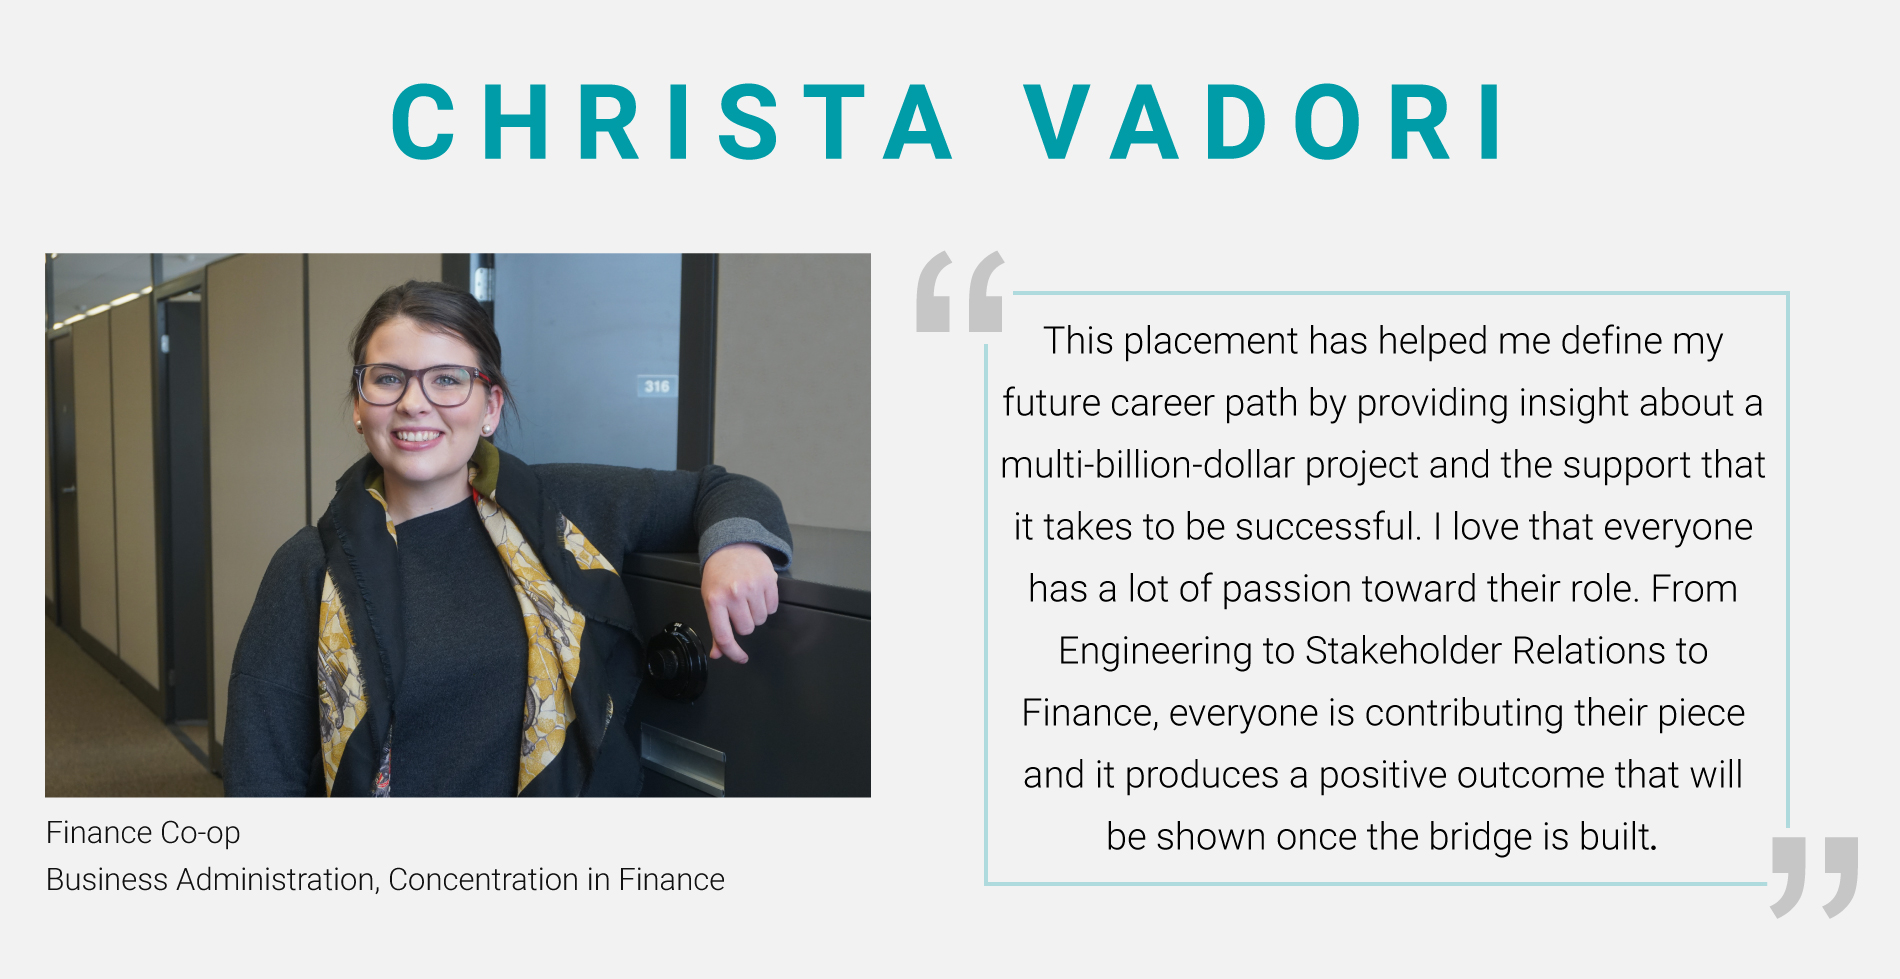 Christa Vadori - Finance Co-Op, Business Administration, Concentration in Finance. "This placement has helped me define my future career path by providing insight about a multi-billion-dollar project and the support that it takes to be successful. I love that evewryone has a lot of passion toward their role. From Engineering to Stakeholder Relations to Finance, everyone is contributing their piece and it produces a positive outcome that will be shown once the bridge is built."